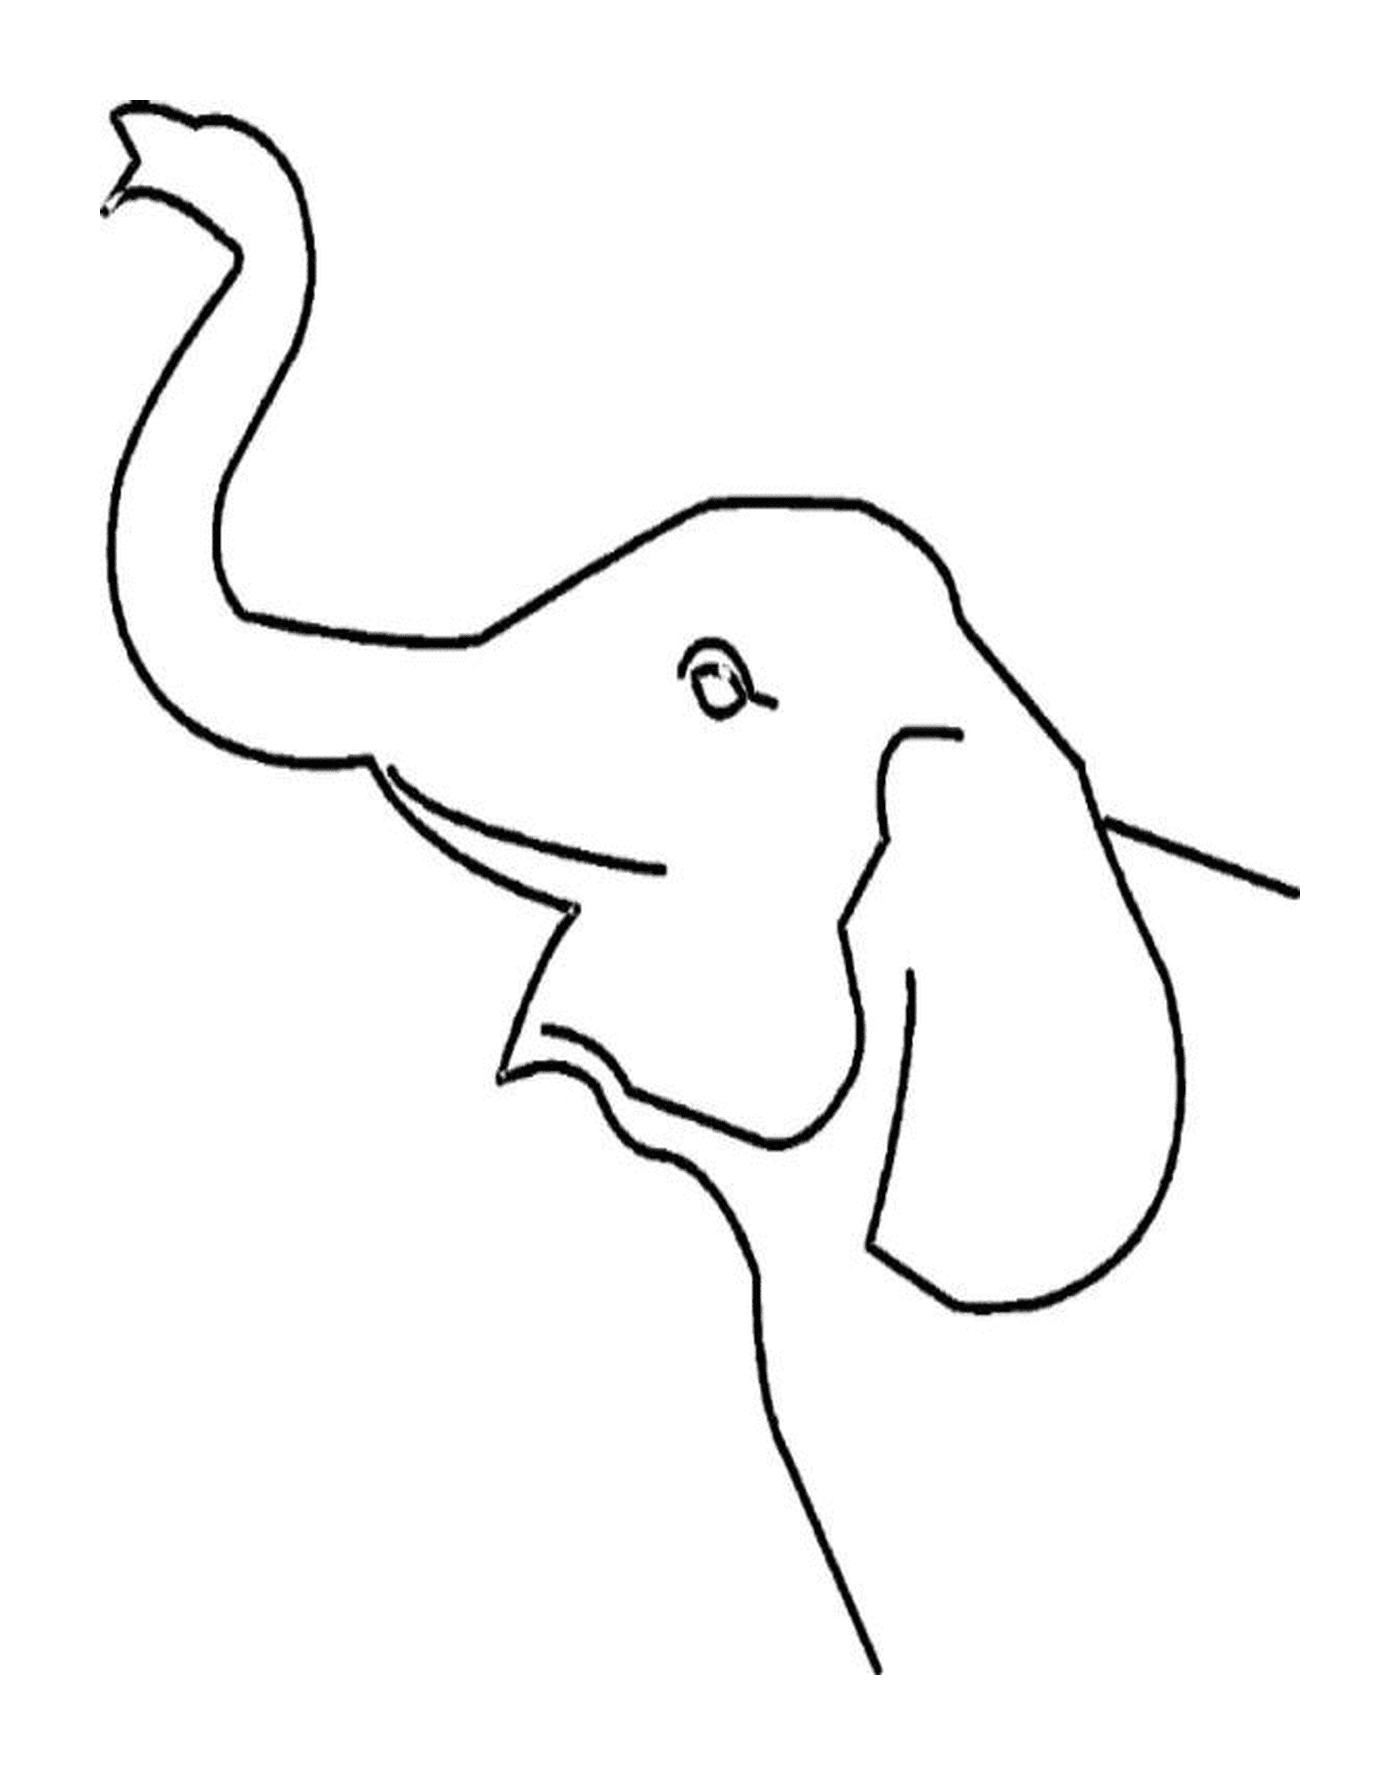  An elephant's trunk is emerging 